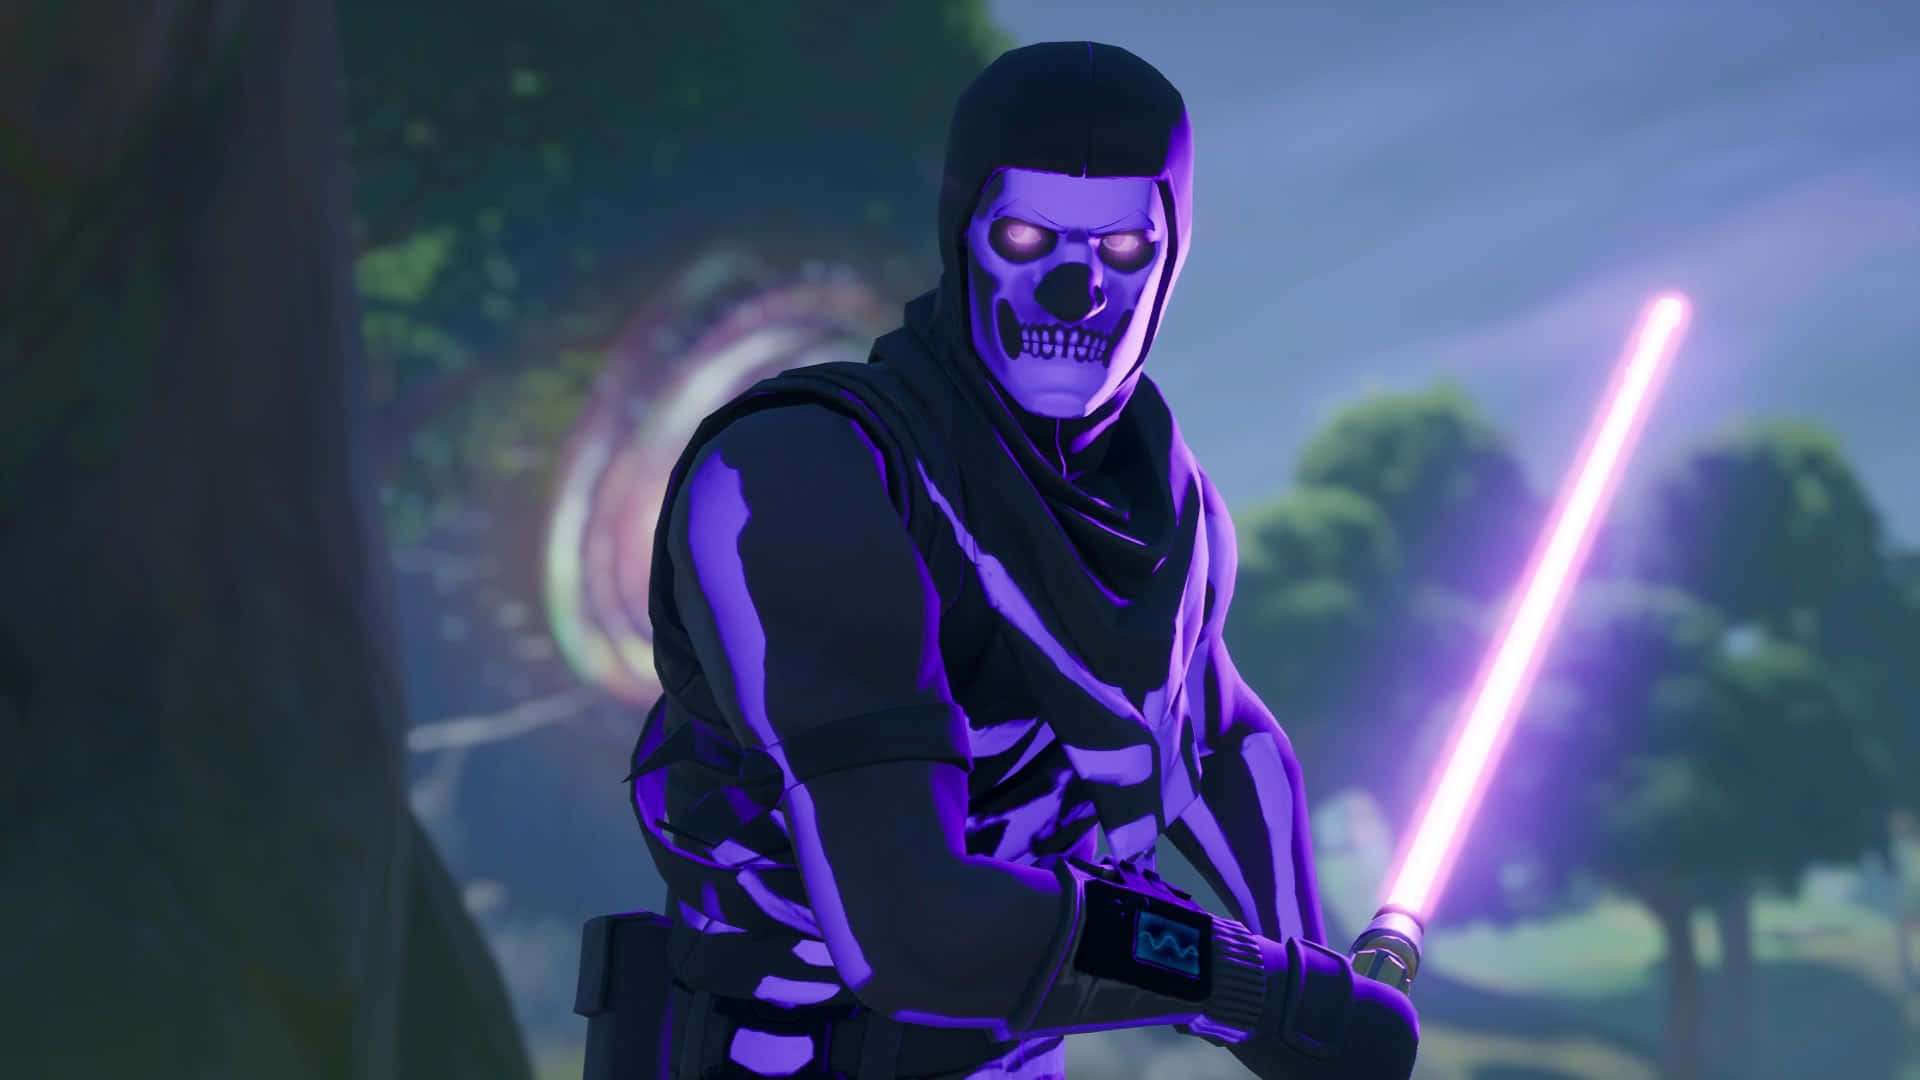 A menacing purple skull trooper, ready to take on the world. Wallpaper